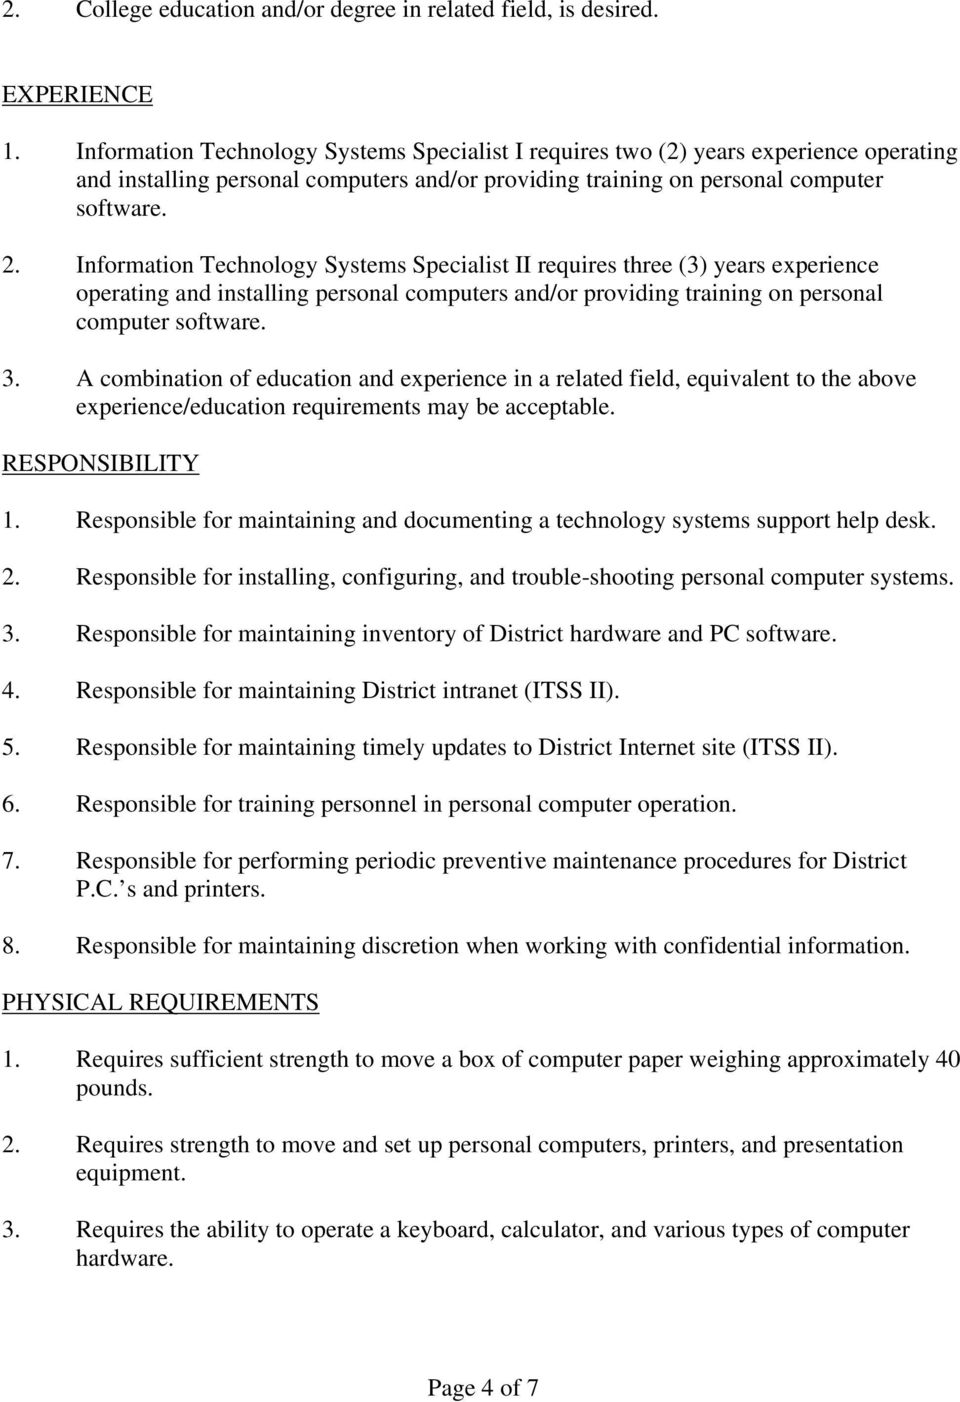 Information Technology Systems Specialist II requires three (3) years experience operating and installing personal computers and/or providing training on personal computer software. 3.